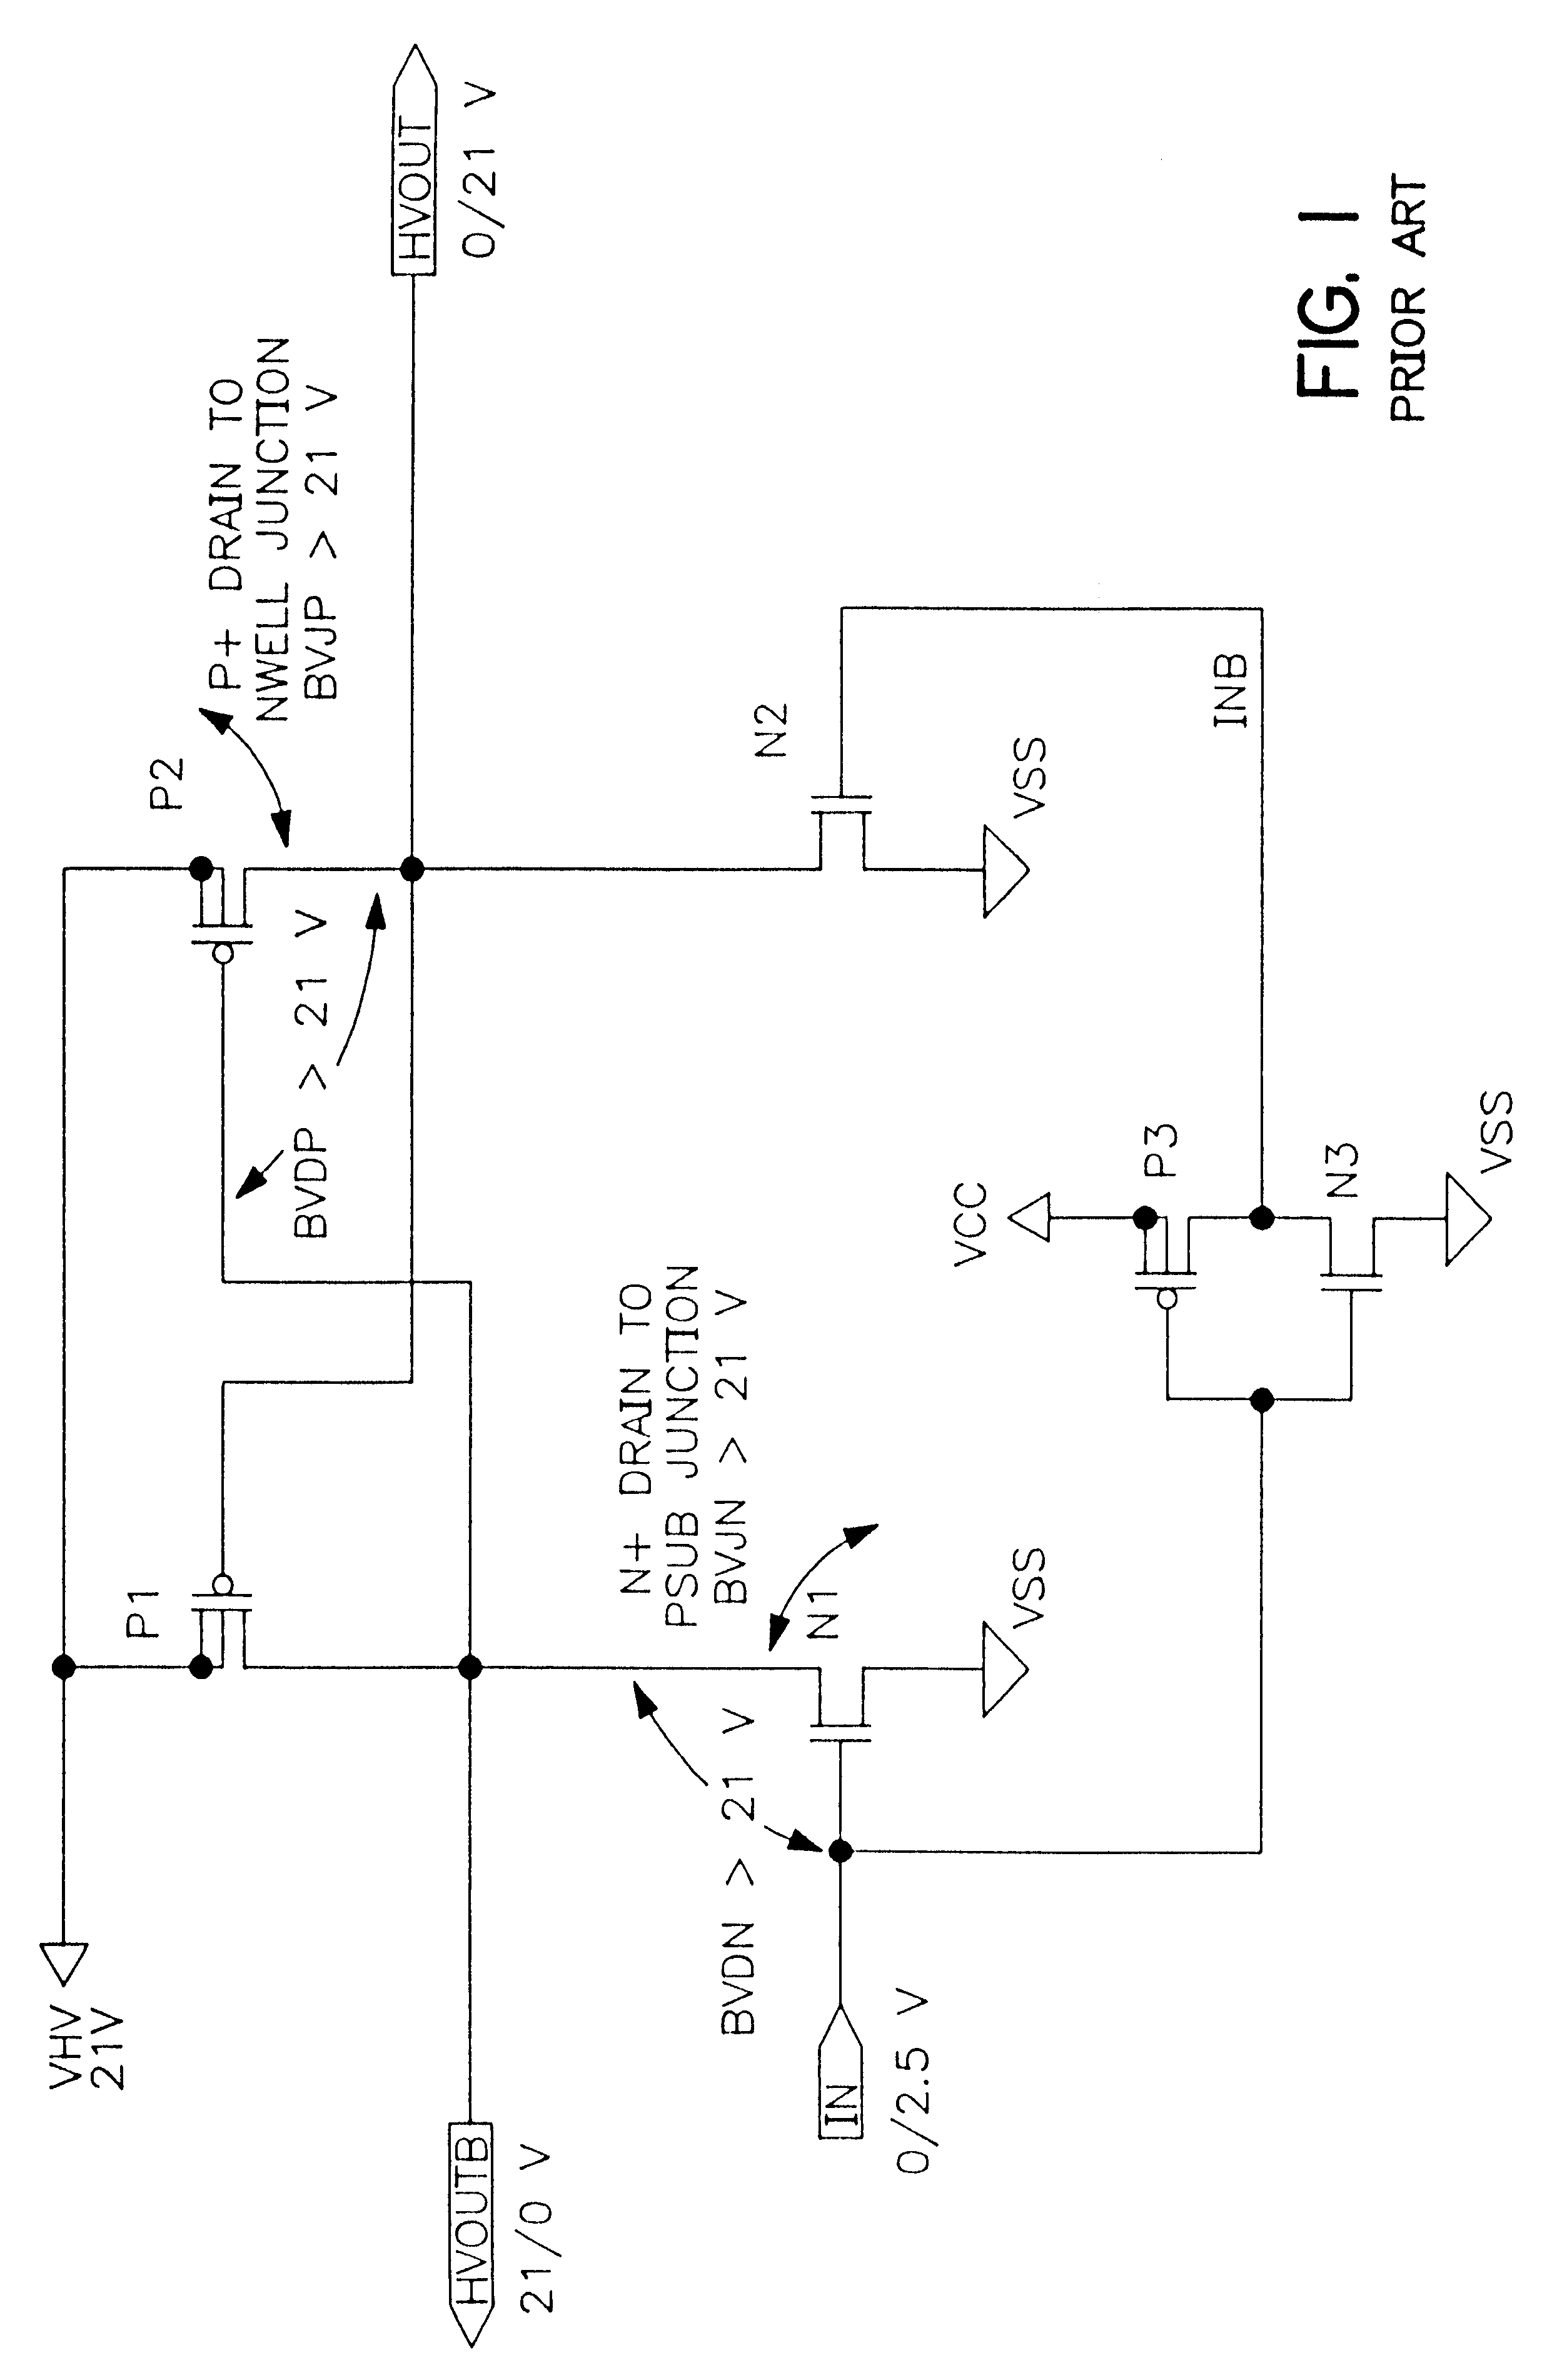 High voltage level shifter for switching high voltage in non-volatile memory integrated circuits